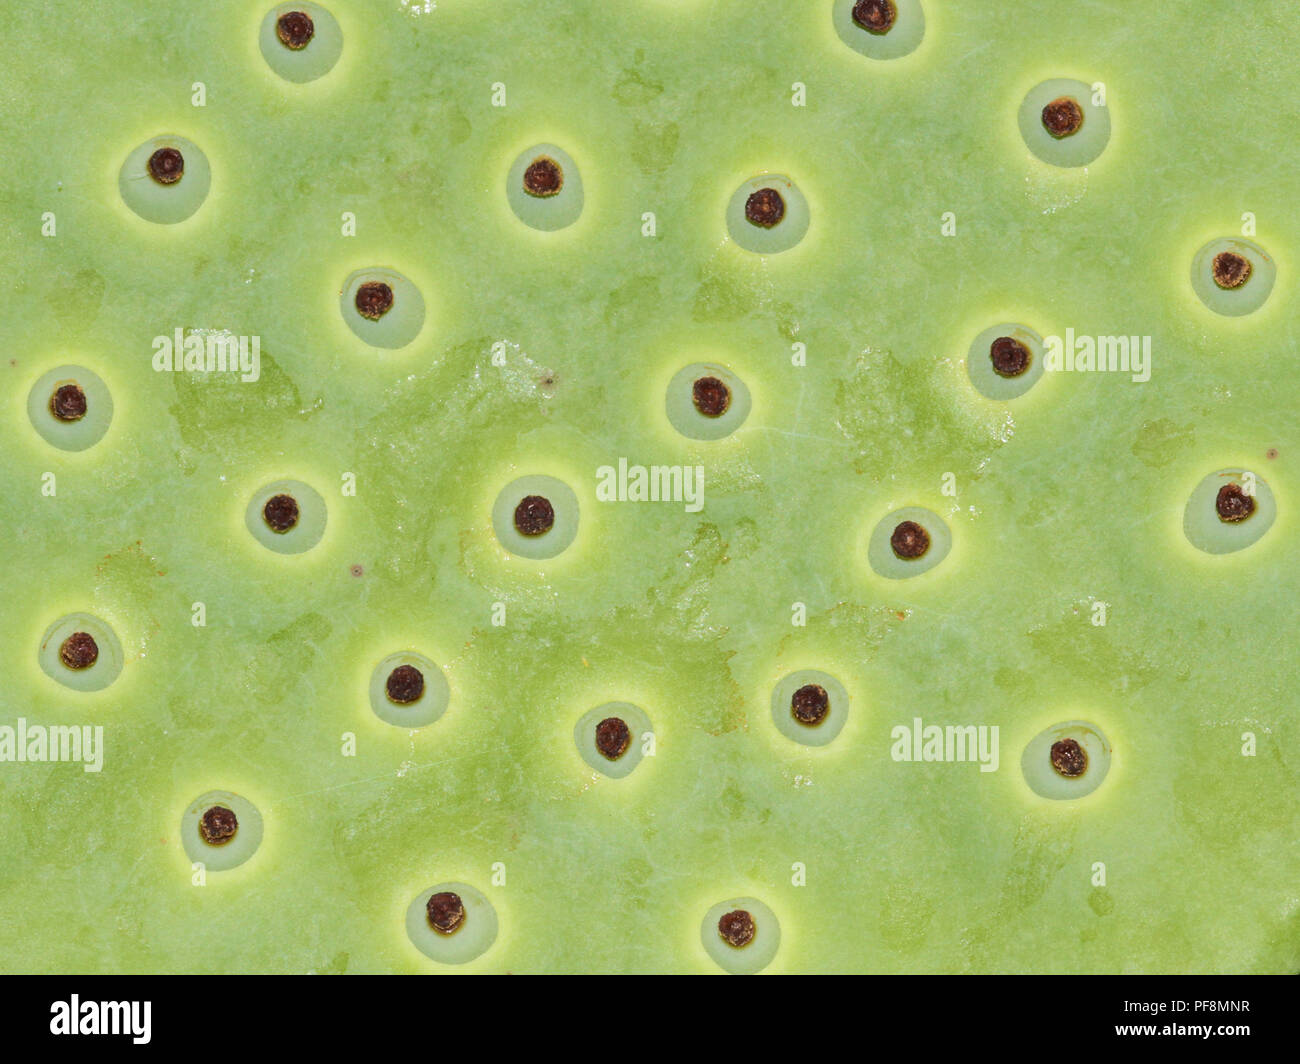 Patterns formed from an immature American lotus seed pod. Stock Photo